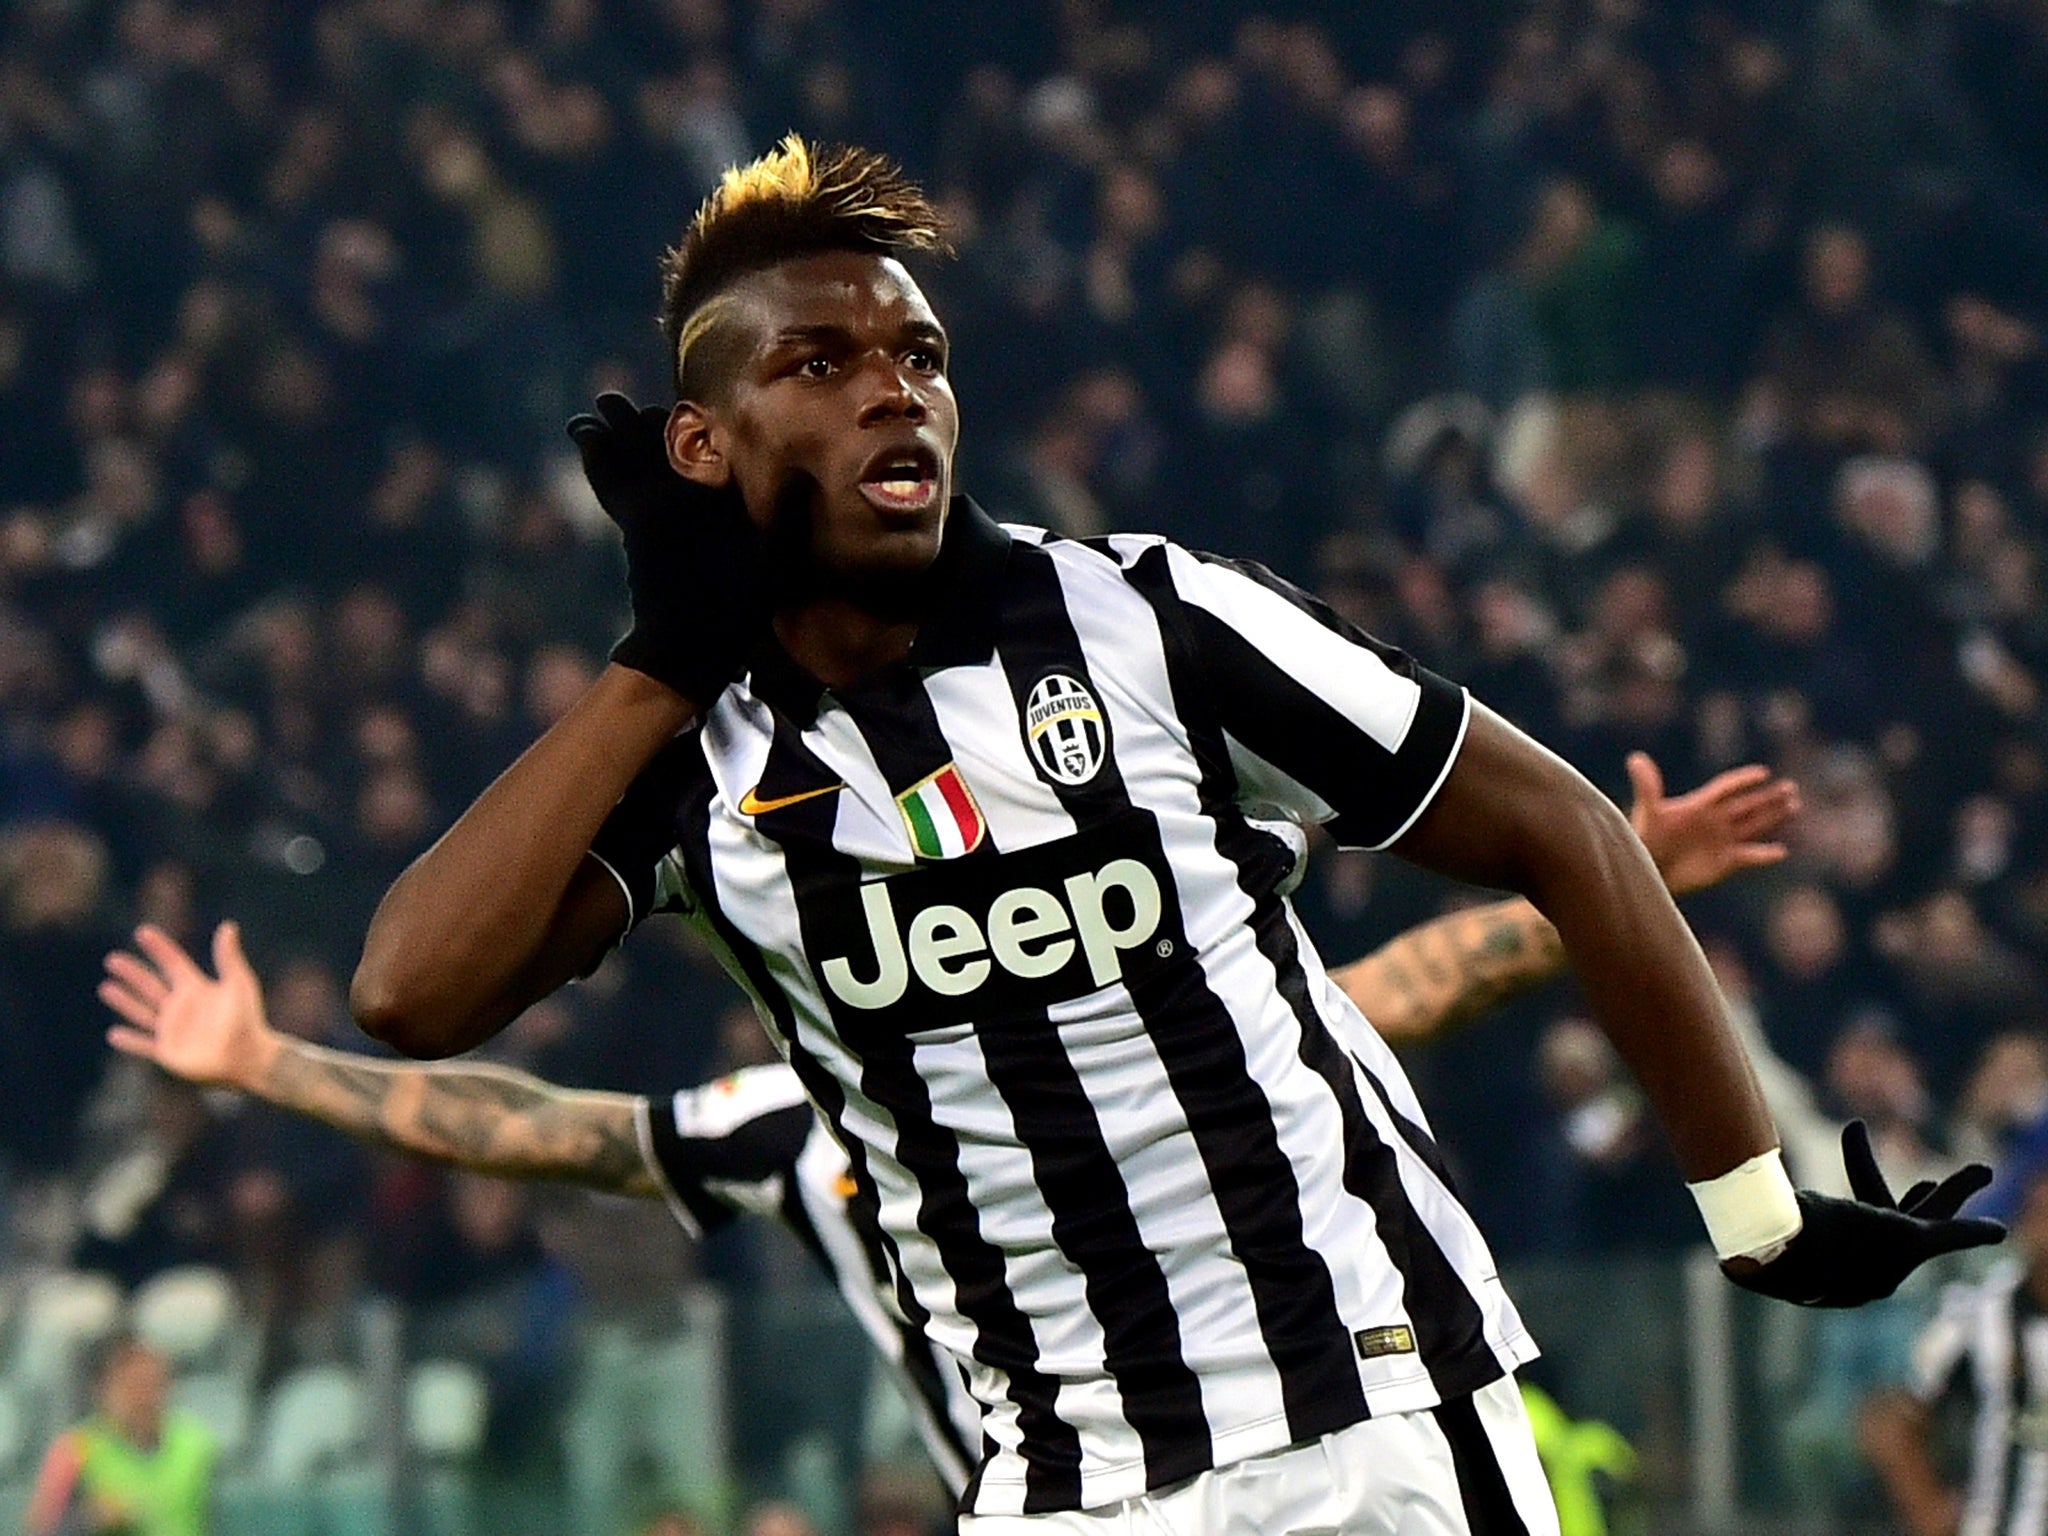 Paul Pogba has developed massively since joining Juventus